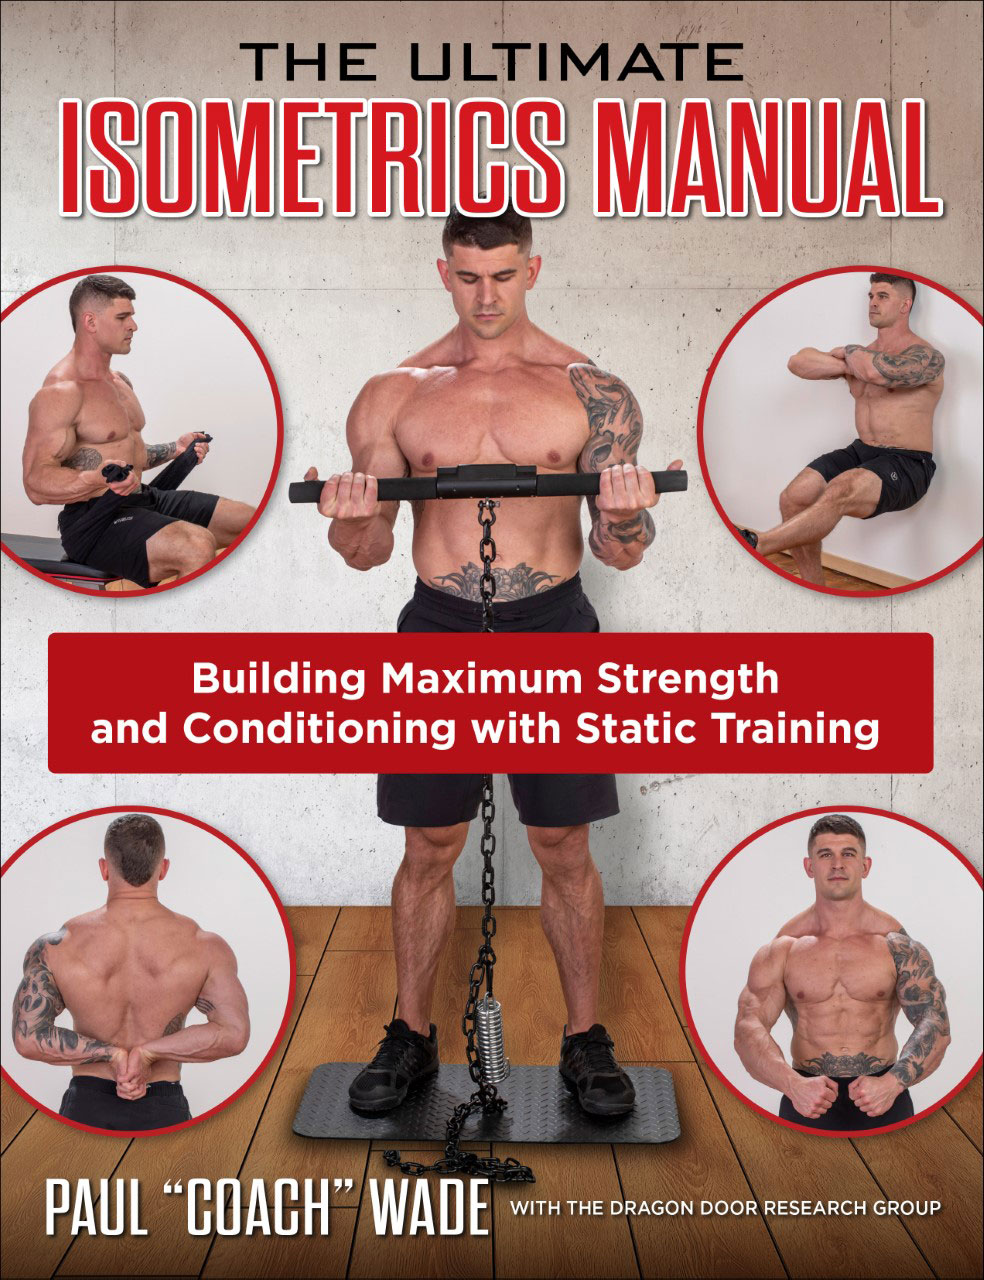 The Ultimate Isometrics Manual by Paul "Coach" Wade